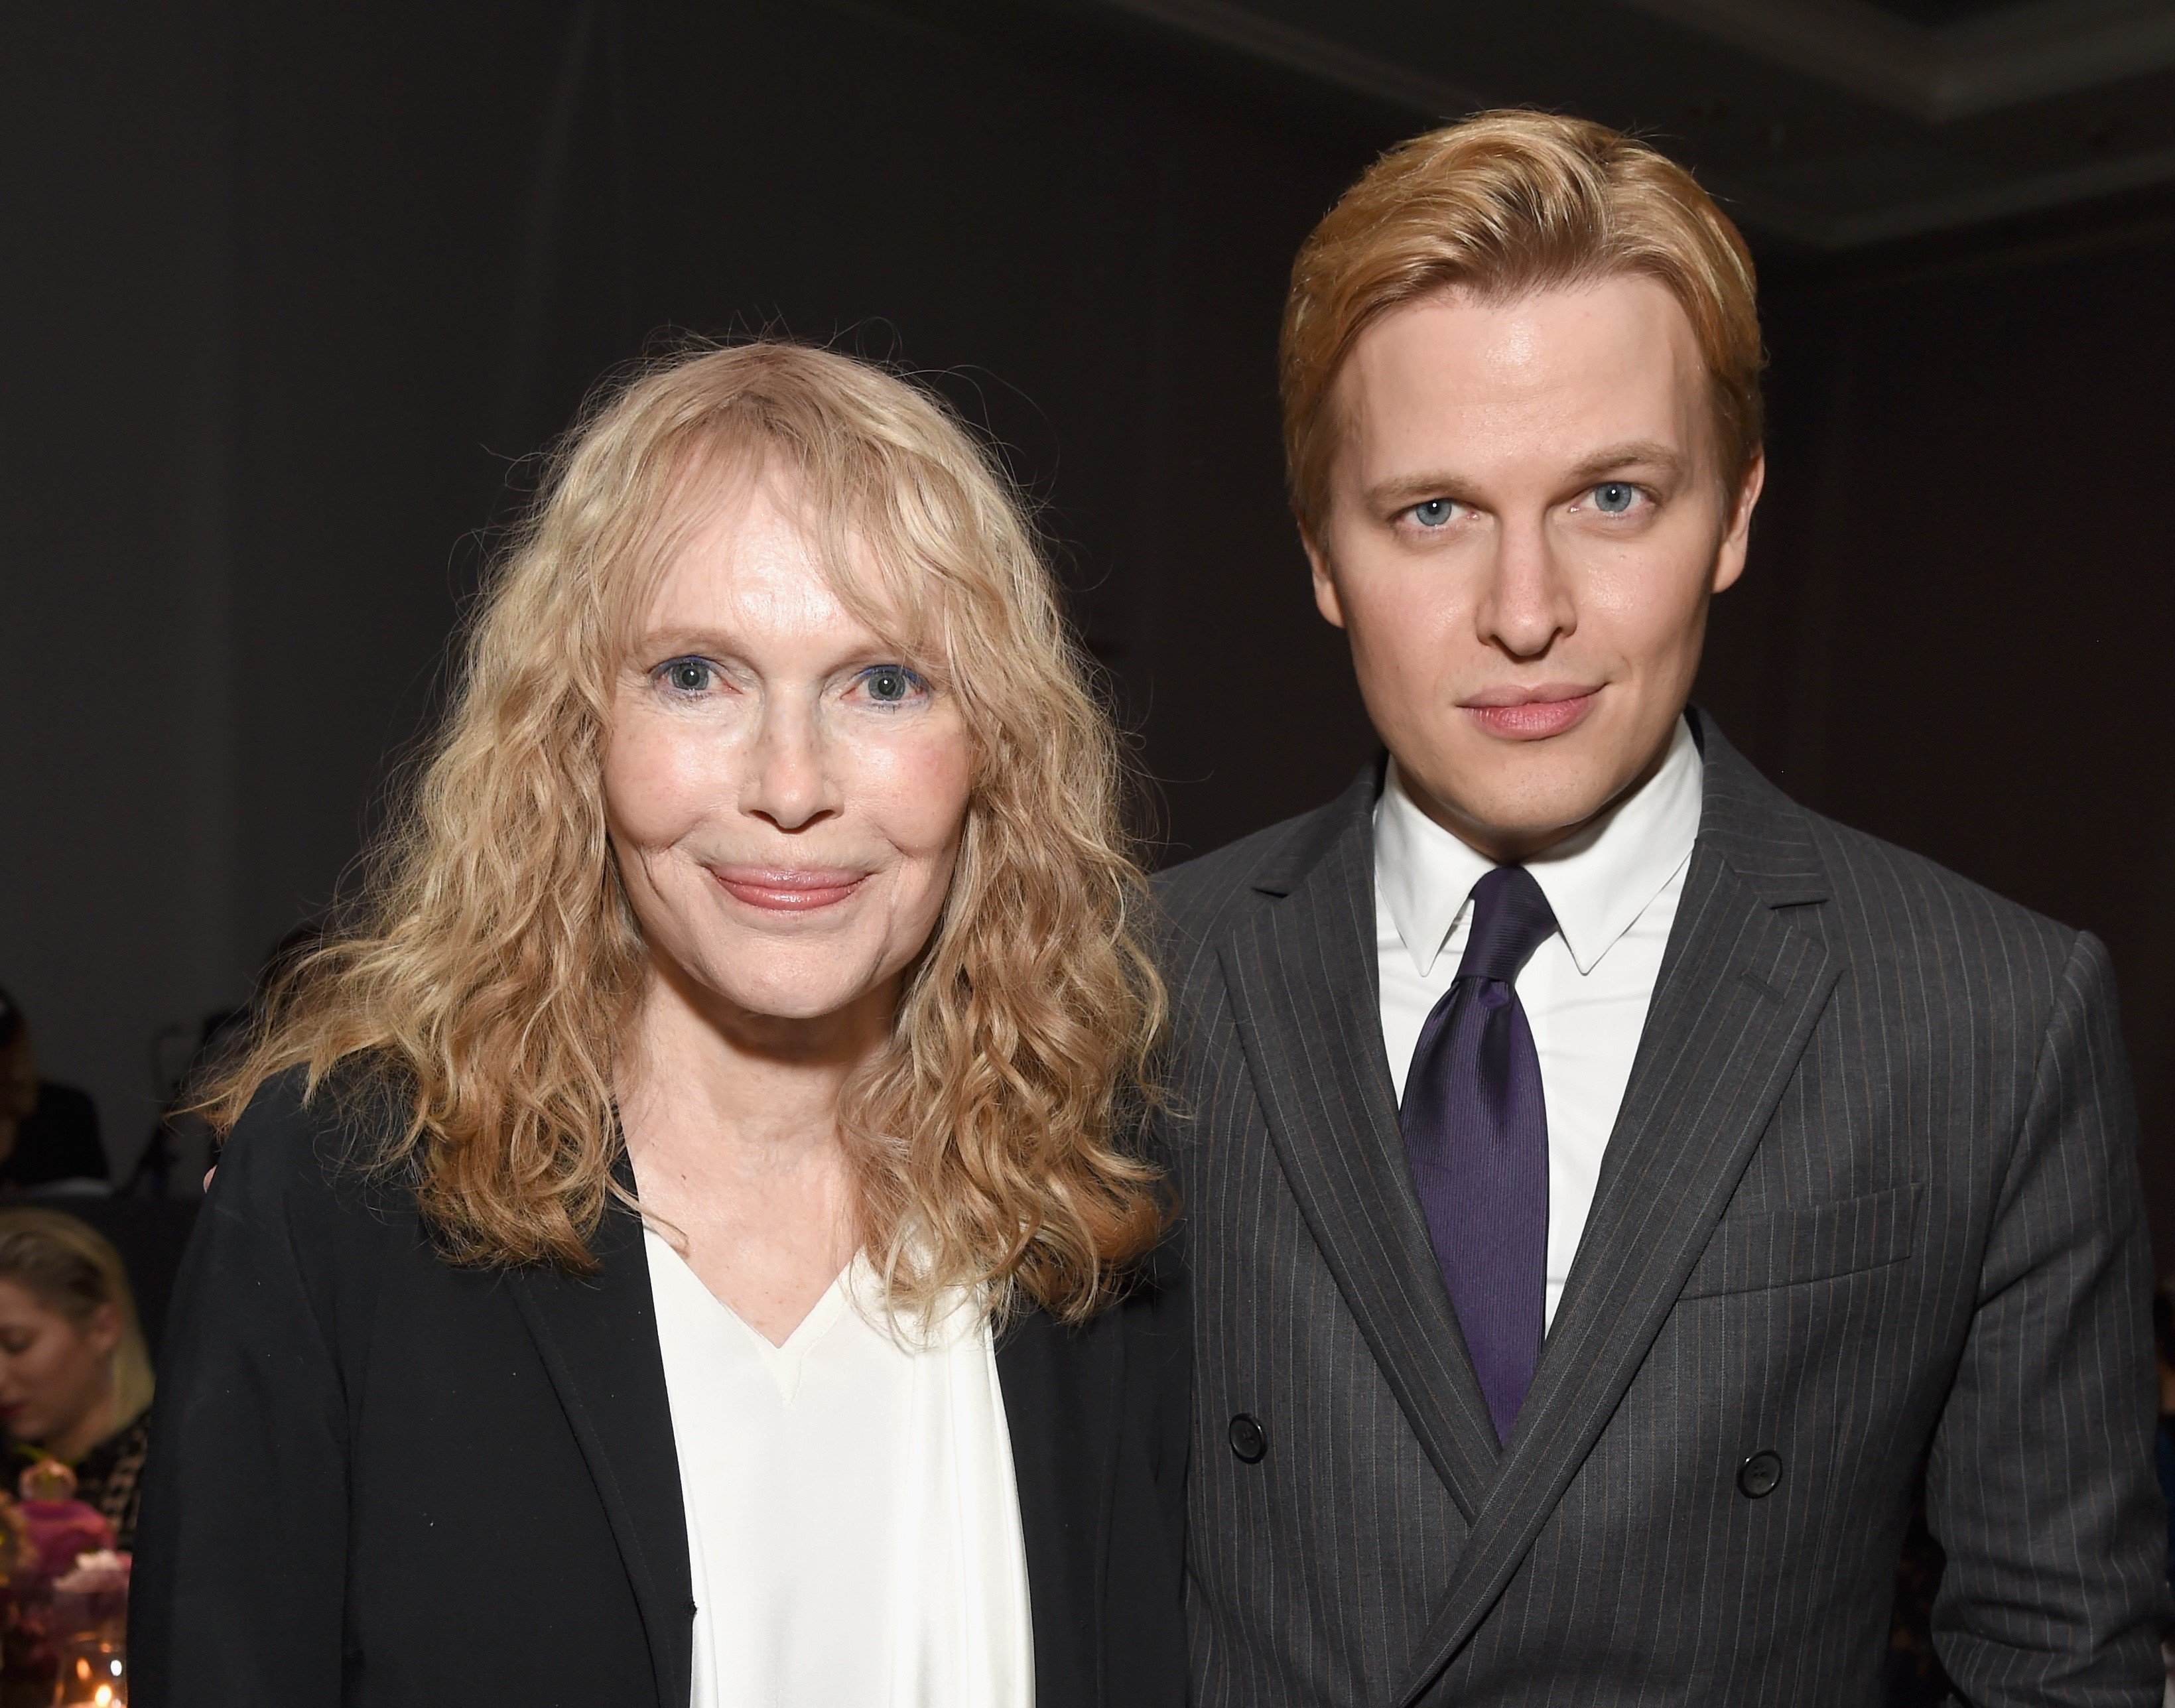 Mia Farrow and Ronan Farrow at ELLE's 25th Annual Women In Hollywood Celebration in 2018, in Los Angeles. | Source: Getty Images